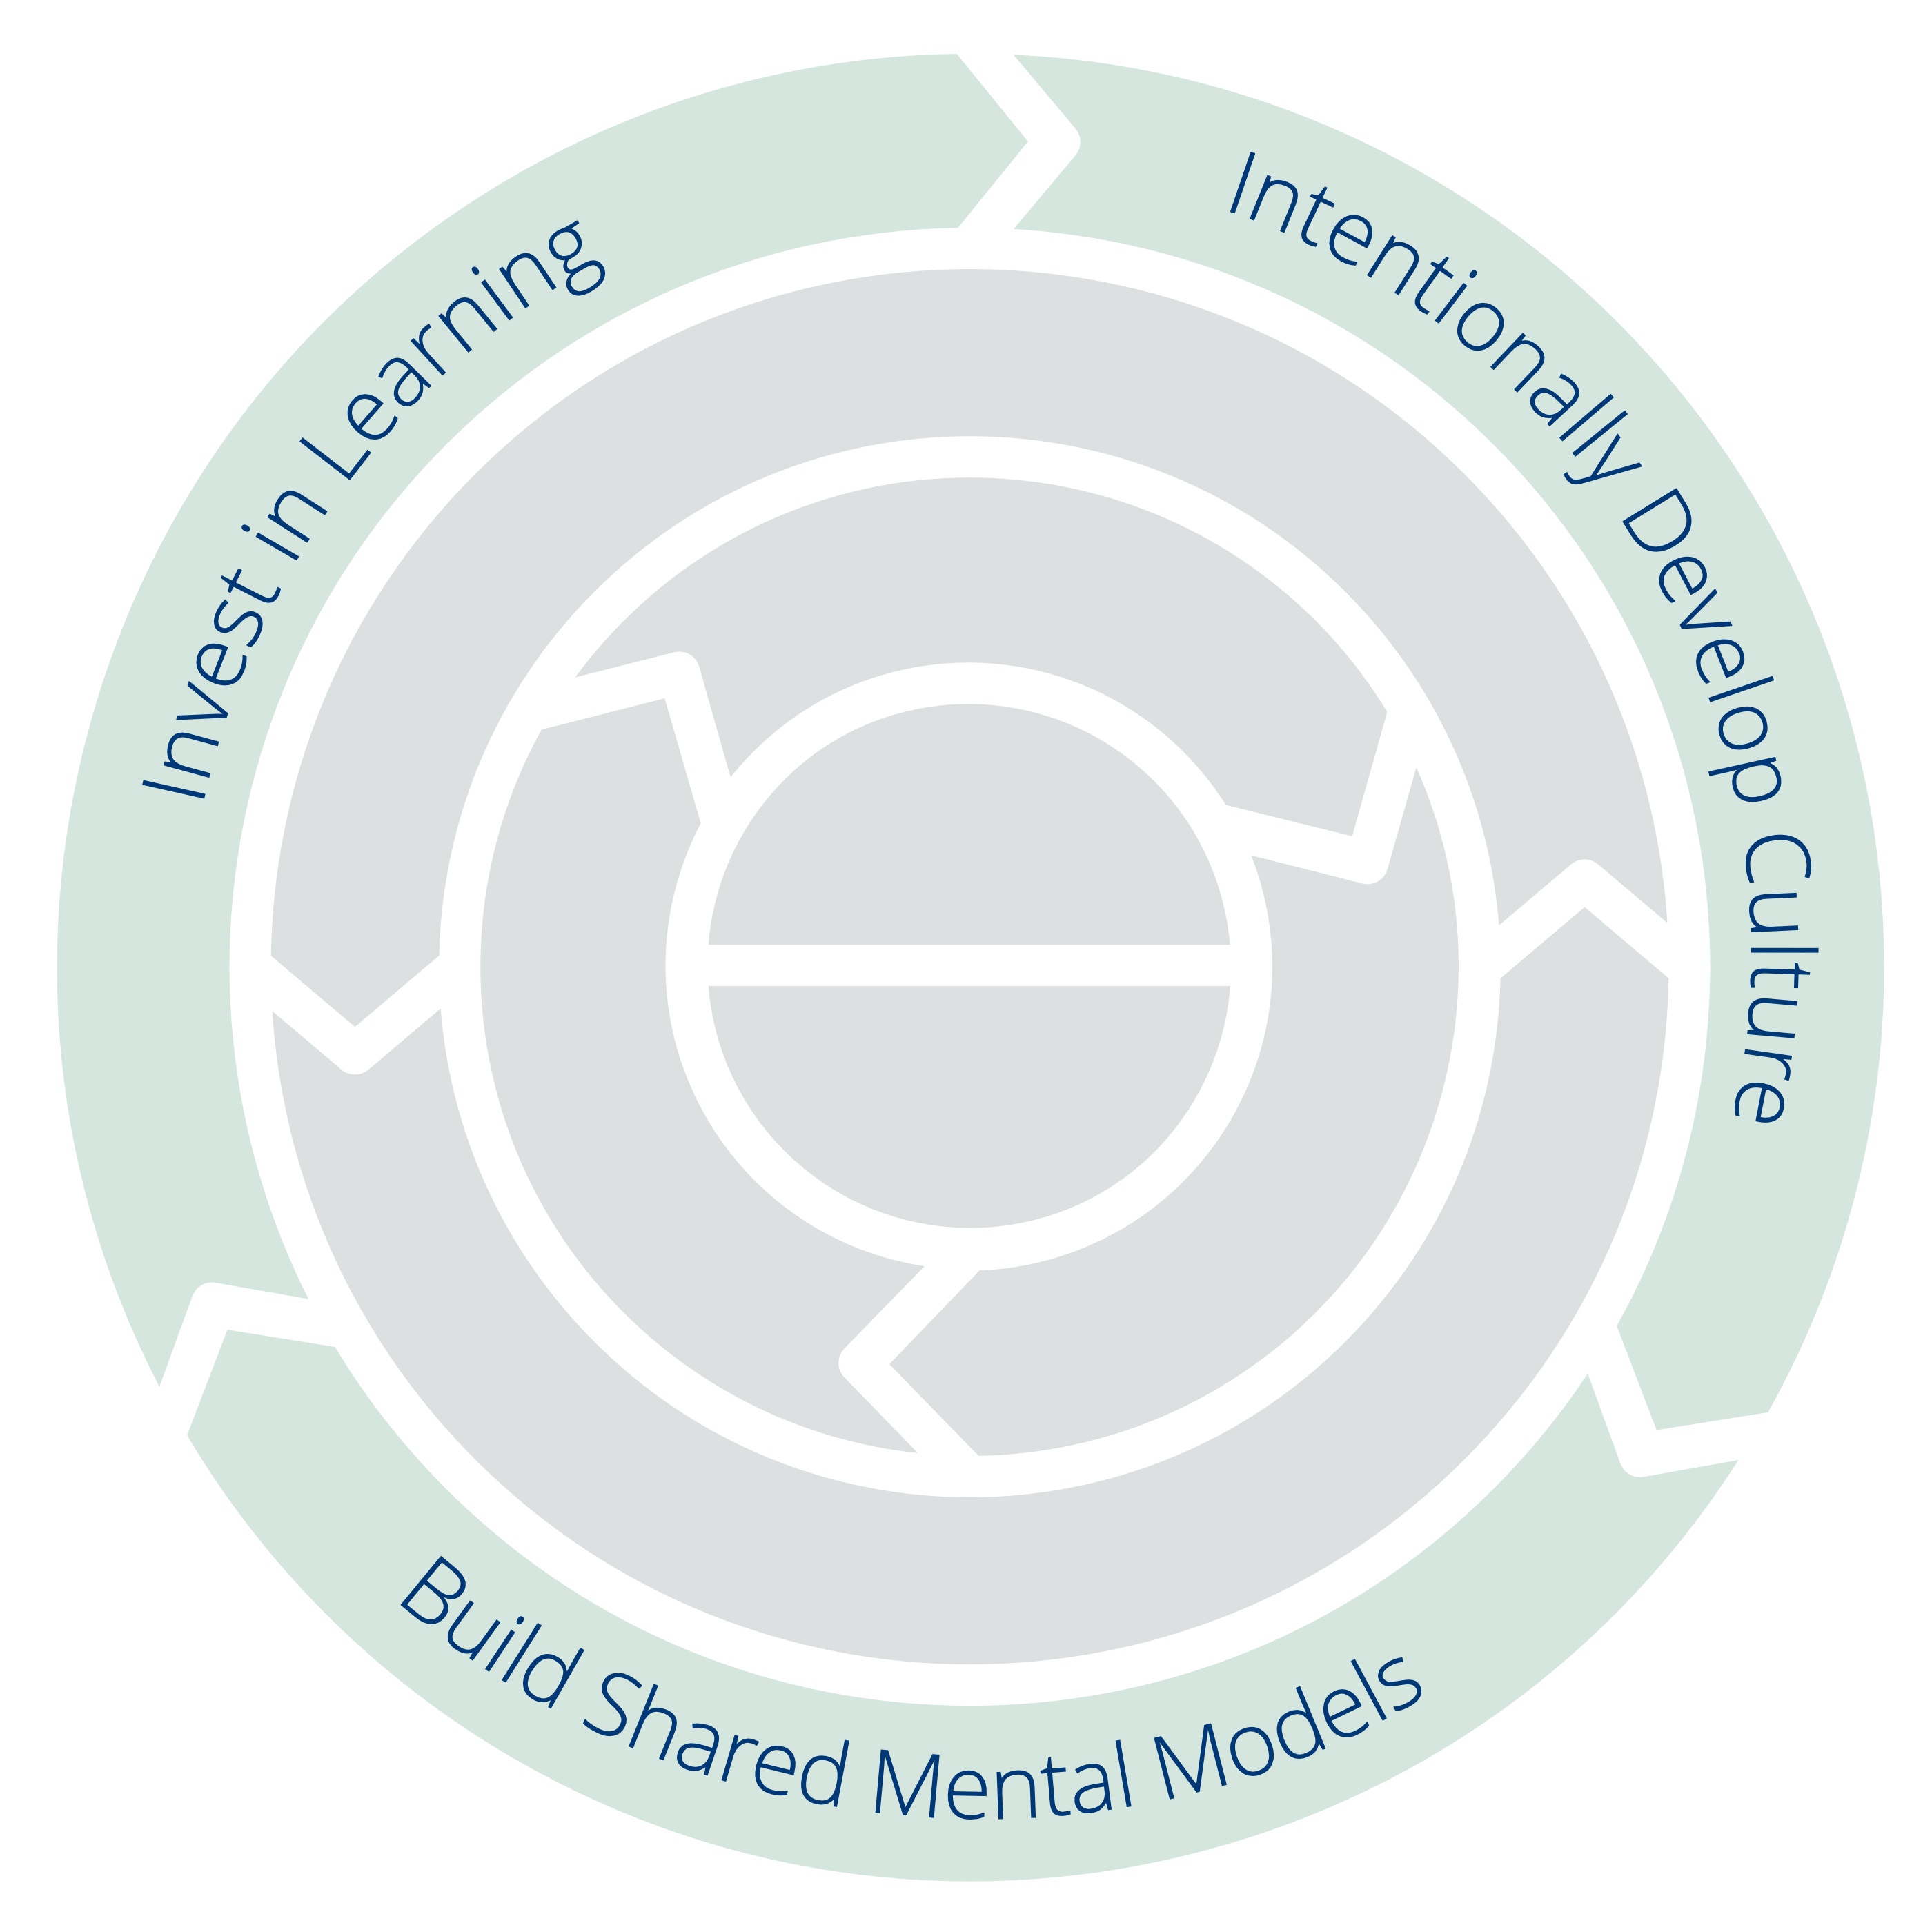 Three Principles for Transformation: Invest in Learning – Intentionally Develop Culture – Build Shared Mental Models